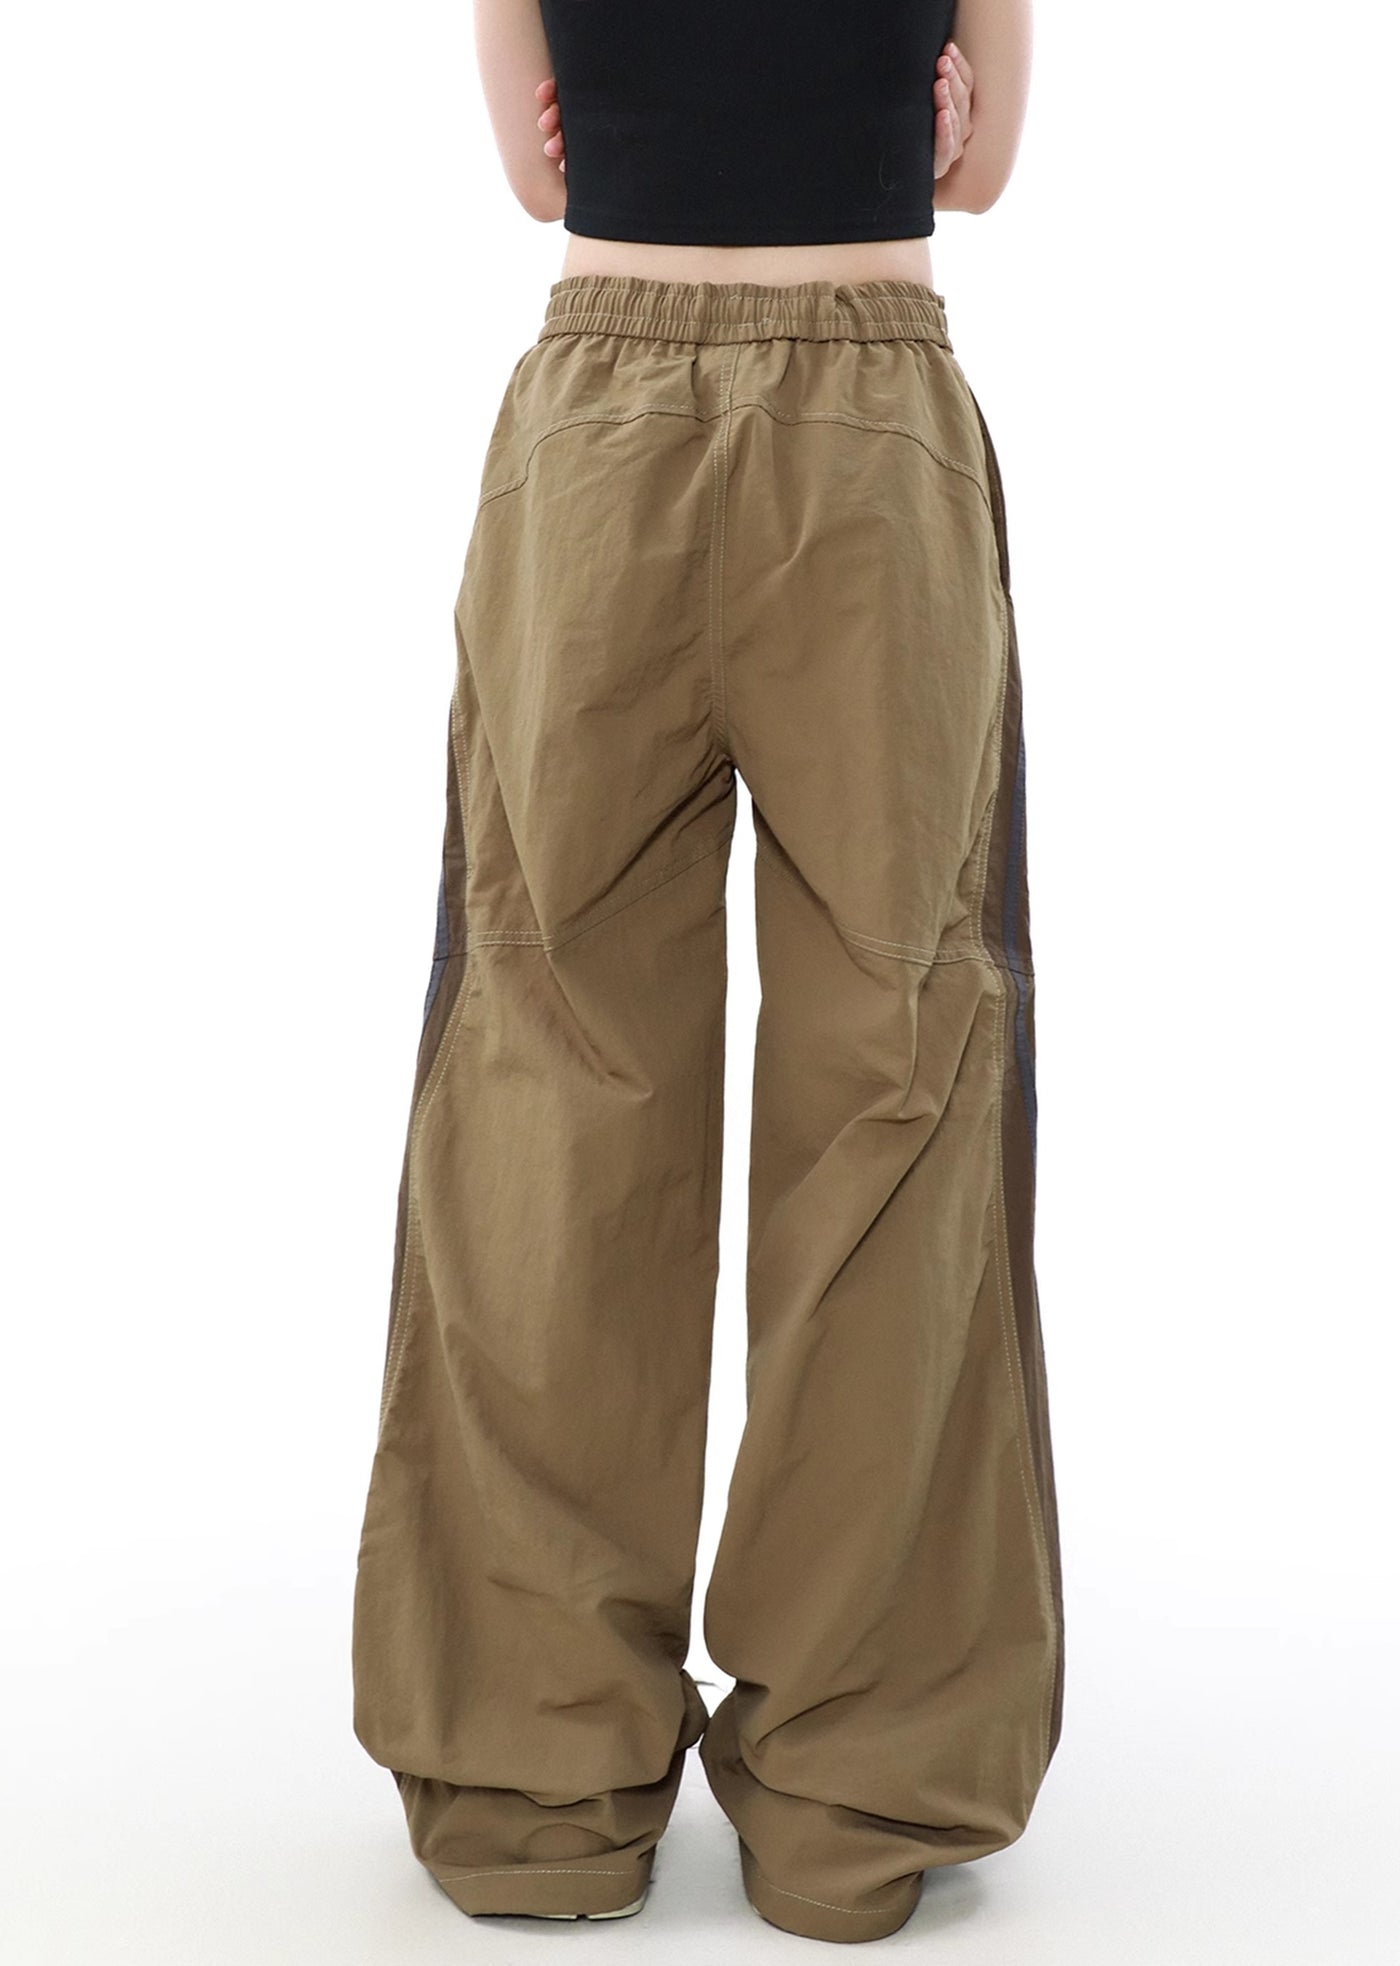 【MR nearly】Sideline sporty casual main booth pants  MR0111